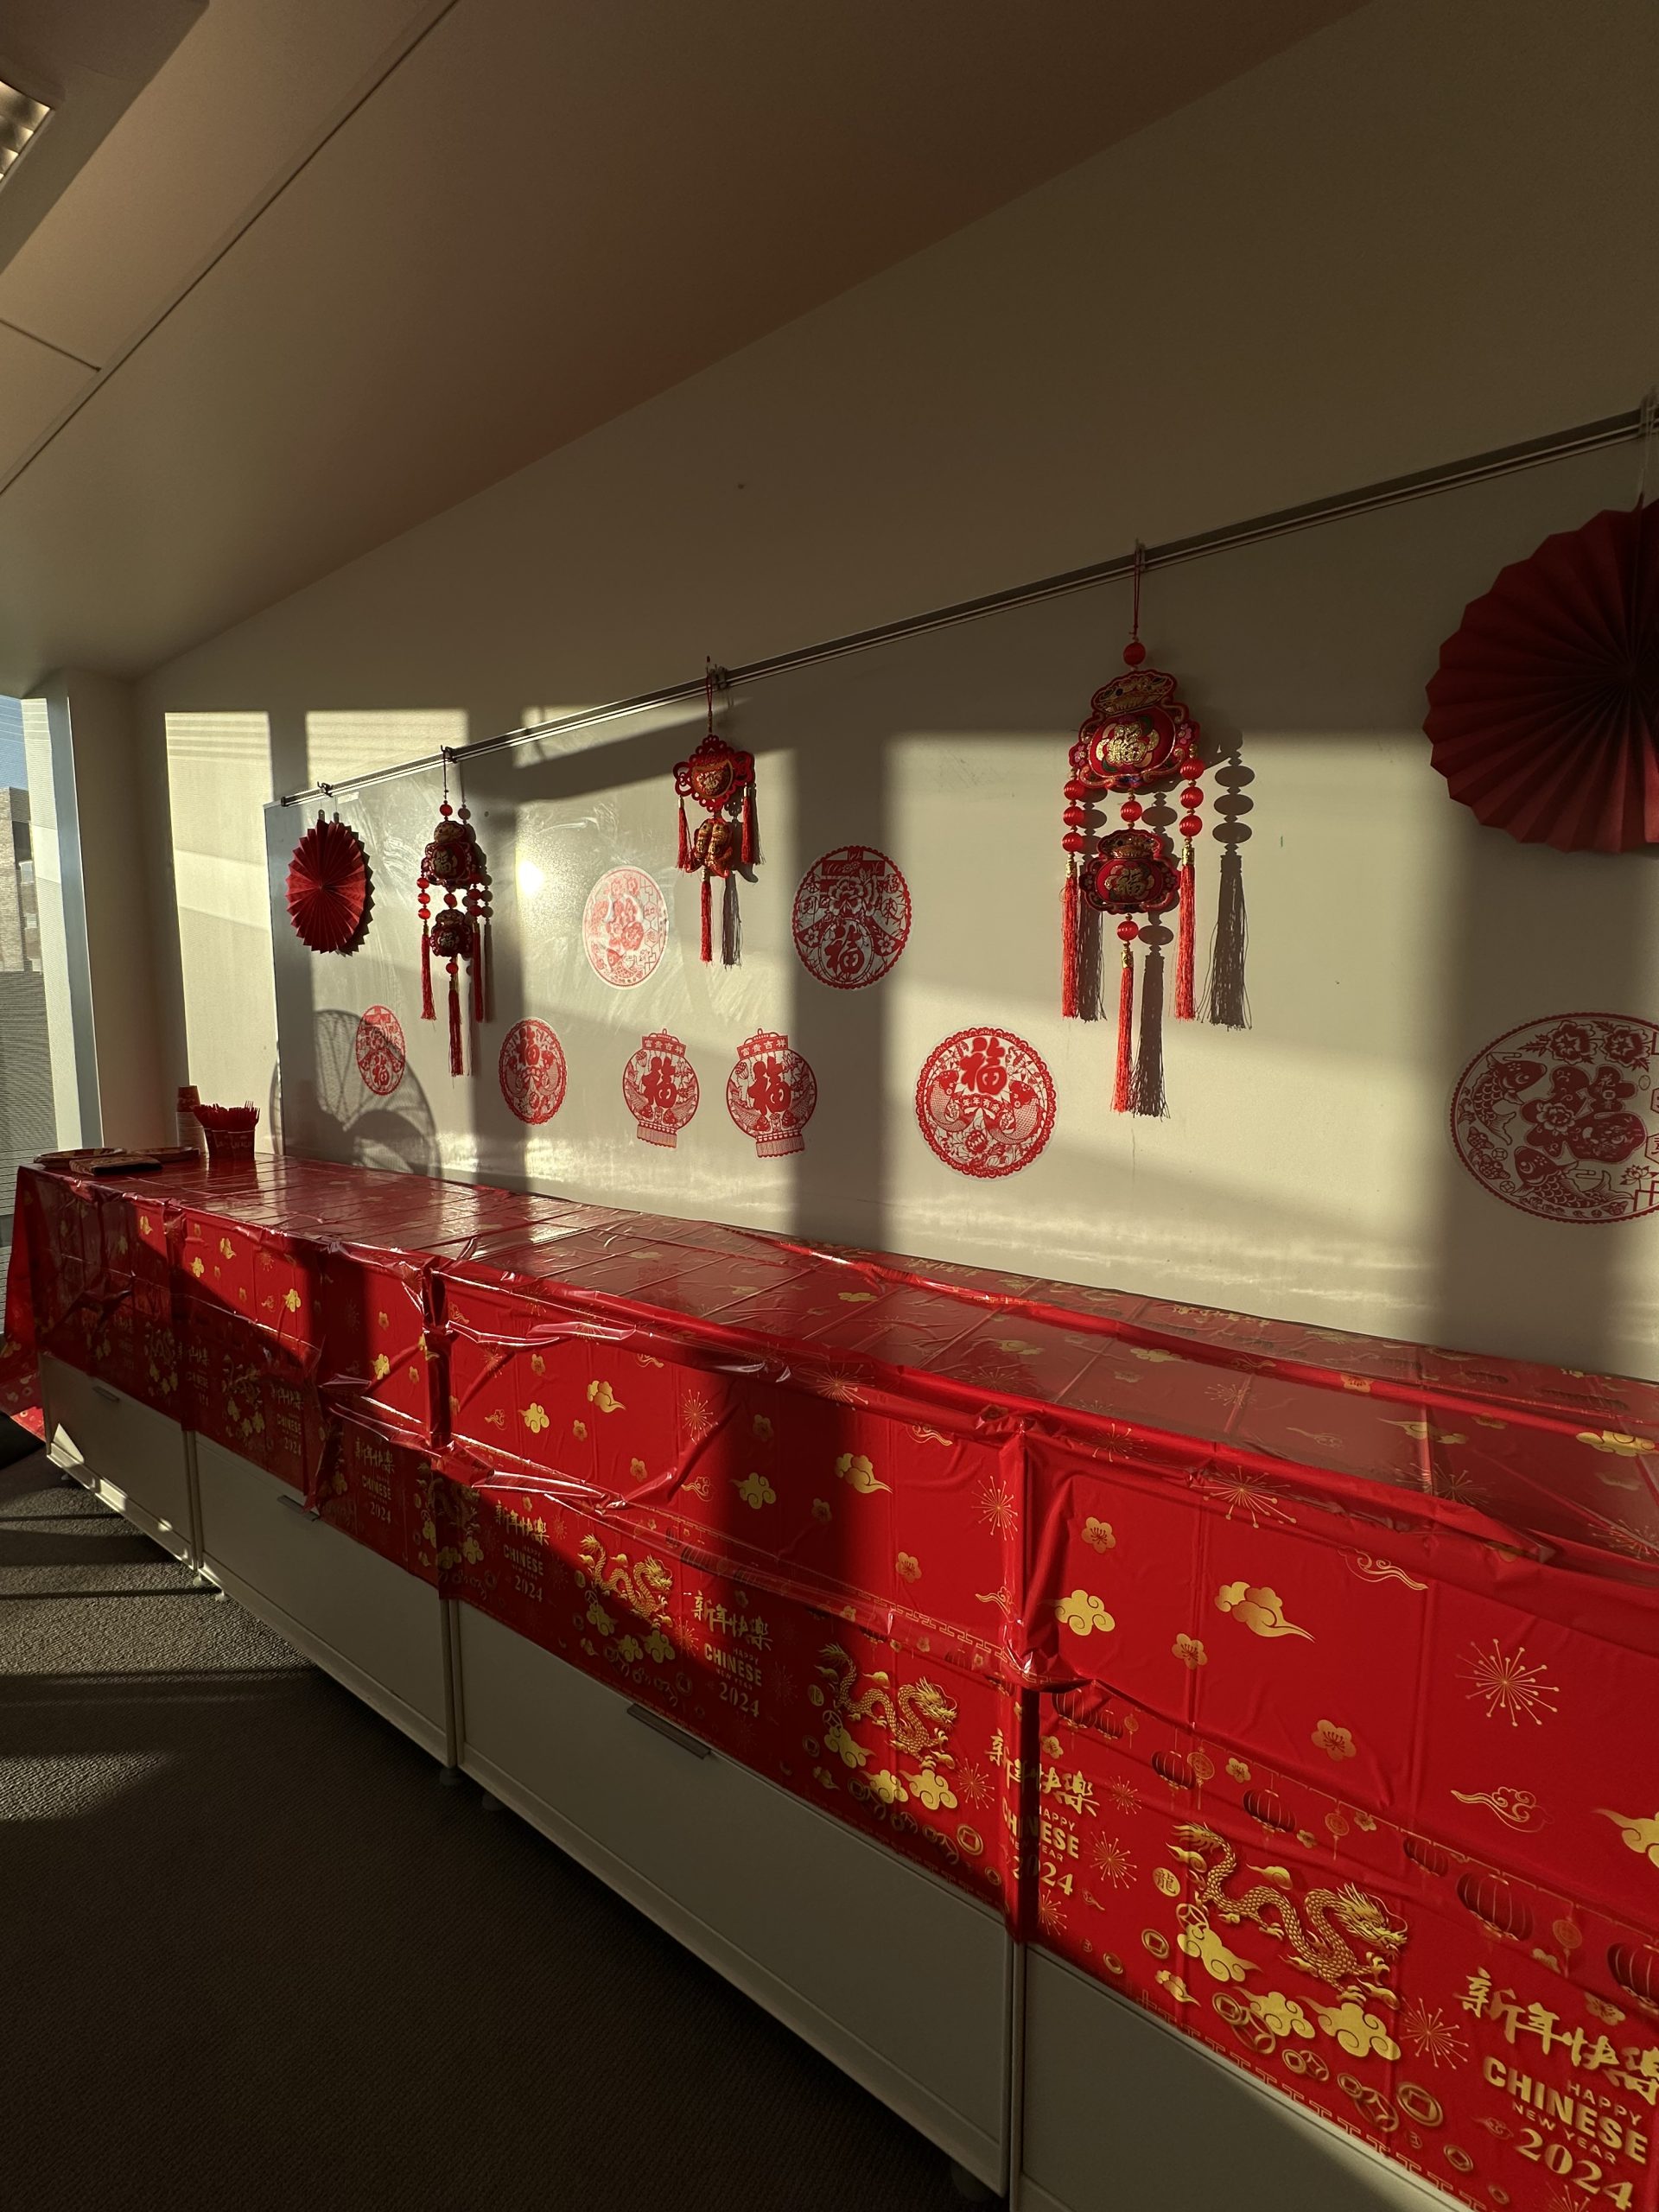 Room decorated with Chinese New Year decorations